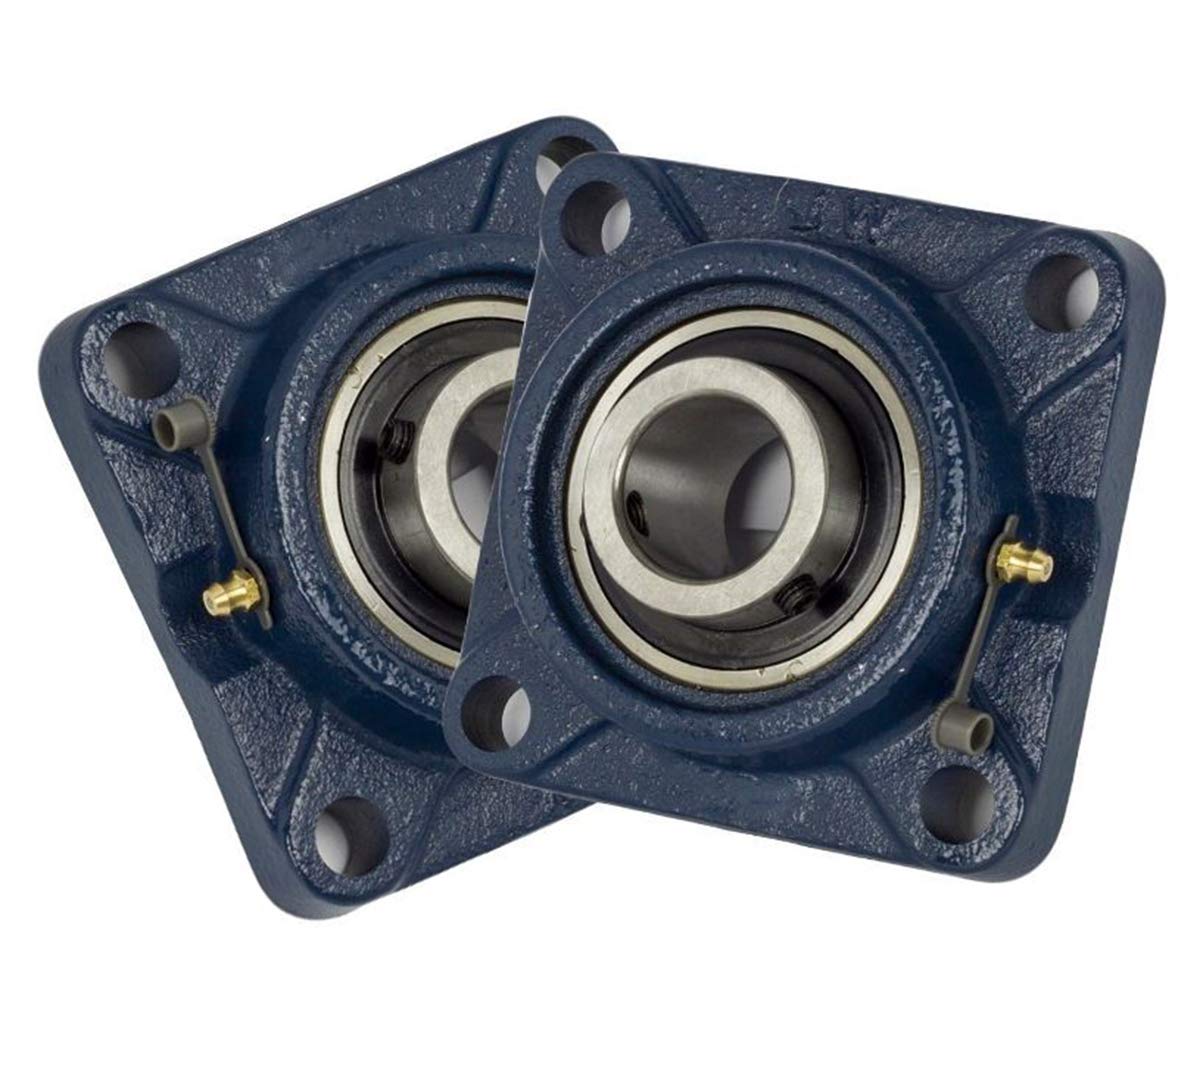 Jeremywell Ucf208-24 Pillow Block Bearing 1-12 Inch Bore, Square, 4-Bolt Flange Mounted, Solid Base, Self-Alignment (2 Pcs)